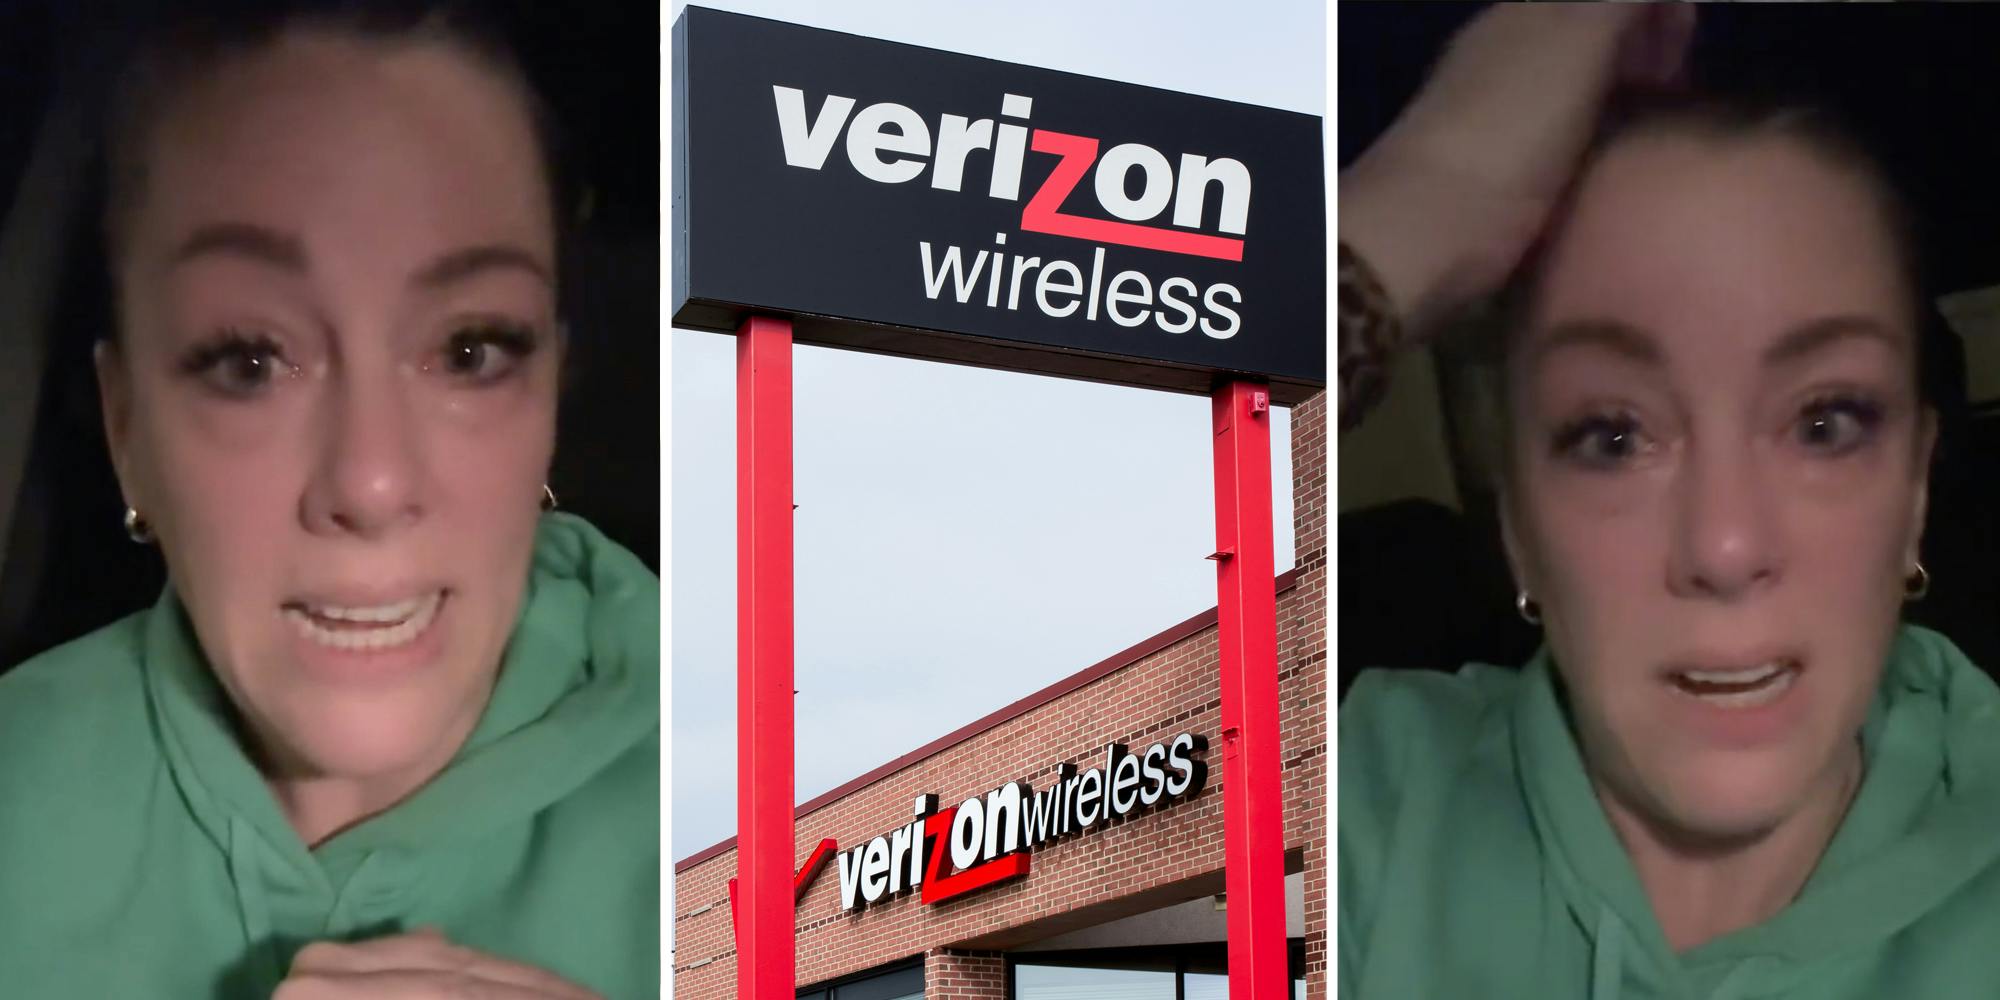 Verizon Customer Charged Almost 1,000 After Her Account Was Hacked